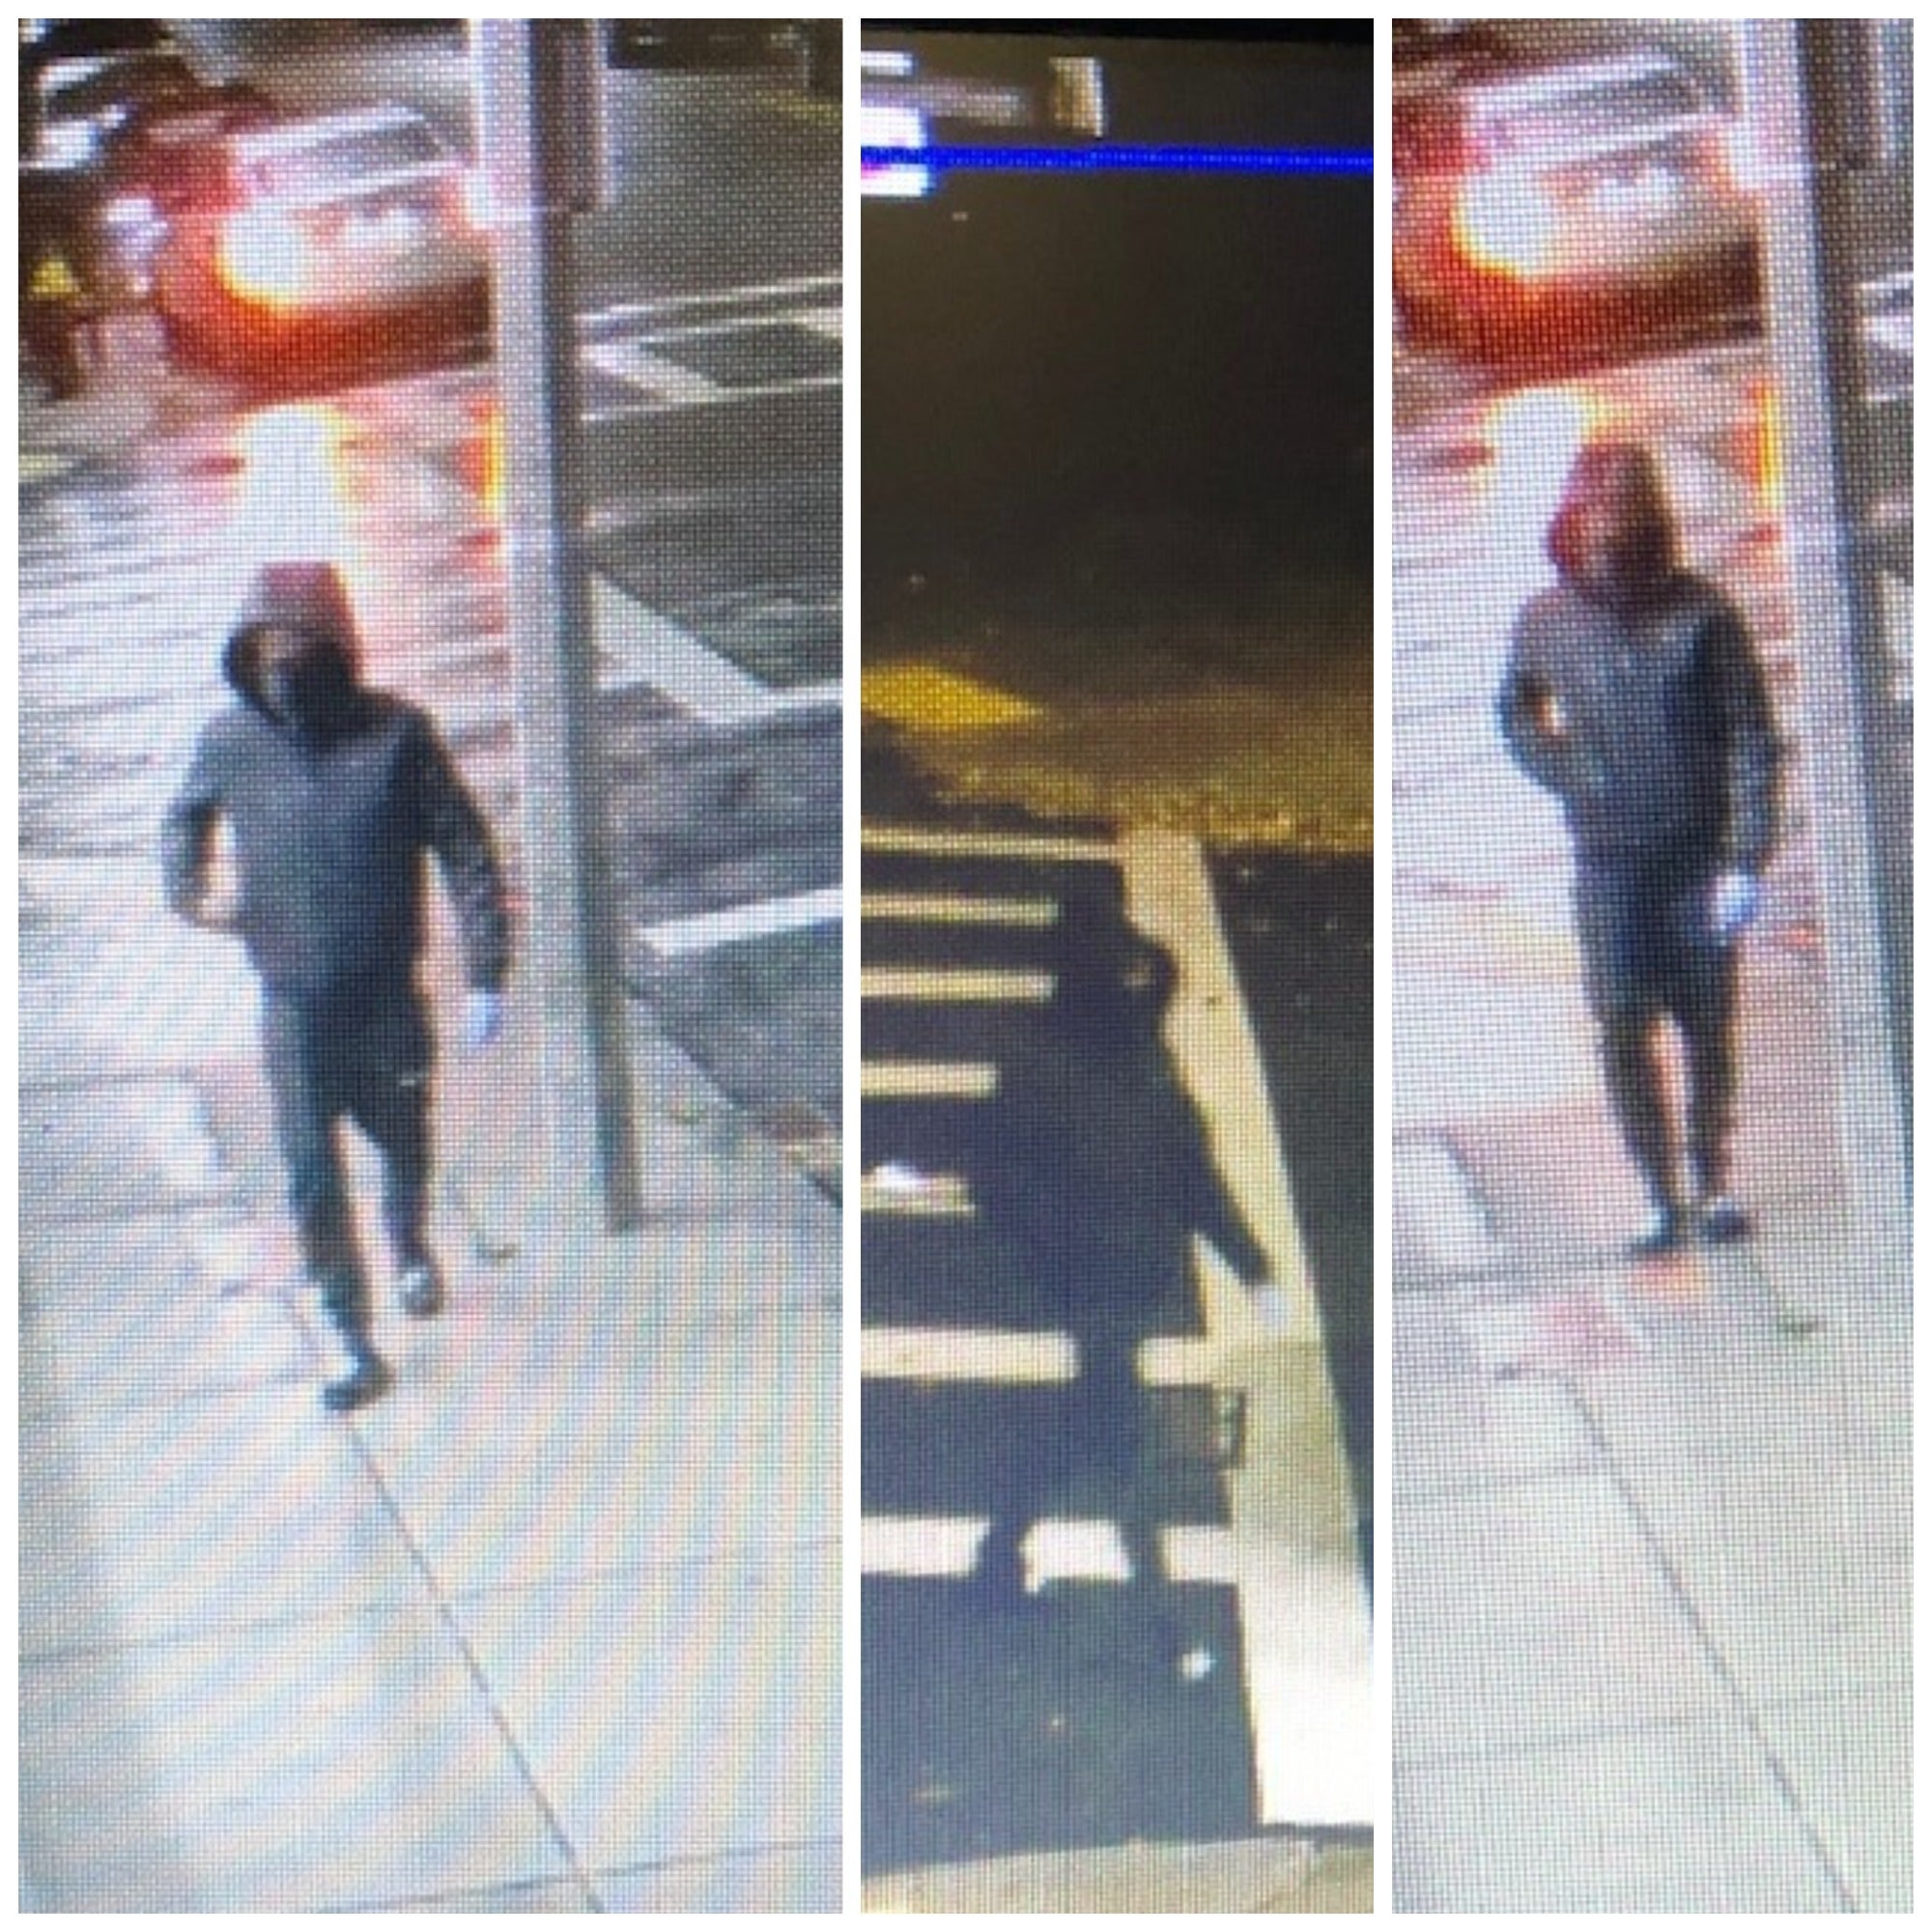 alt = three photo collage of suspect walking on the street in hooded jacket and dark-colored pants